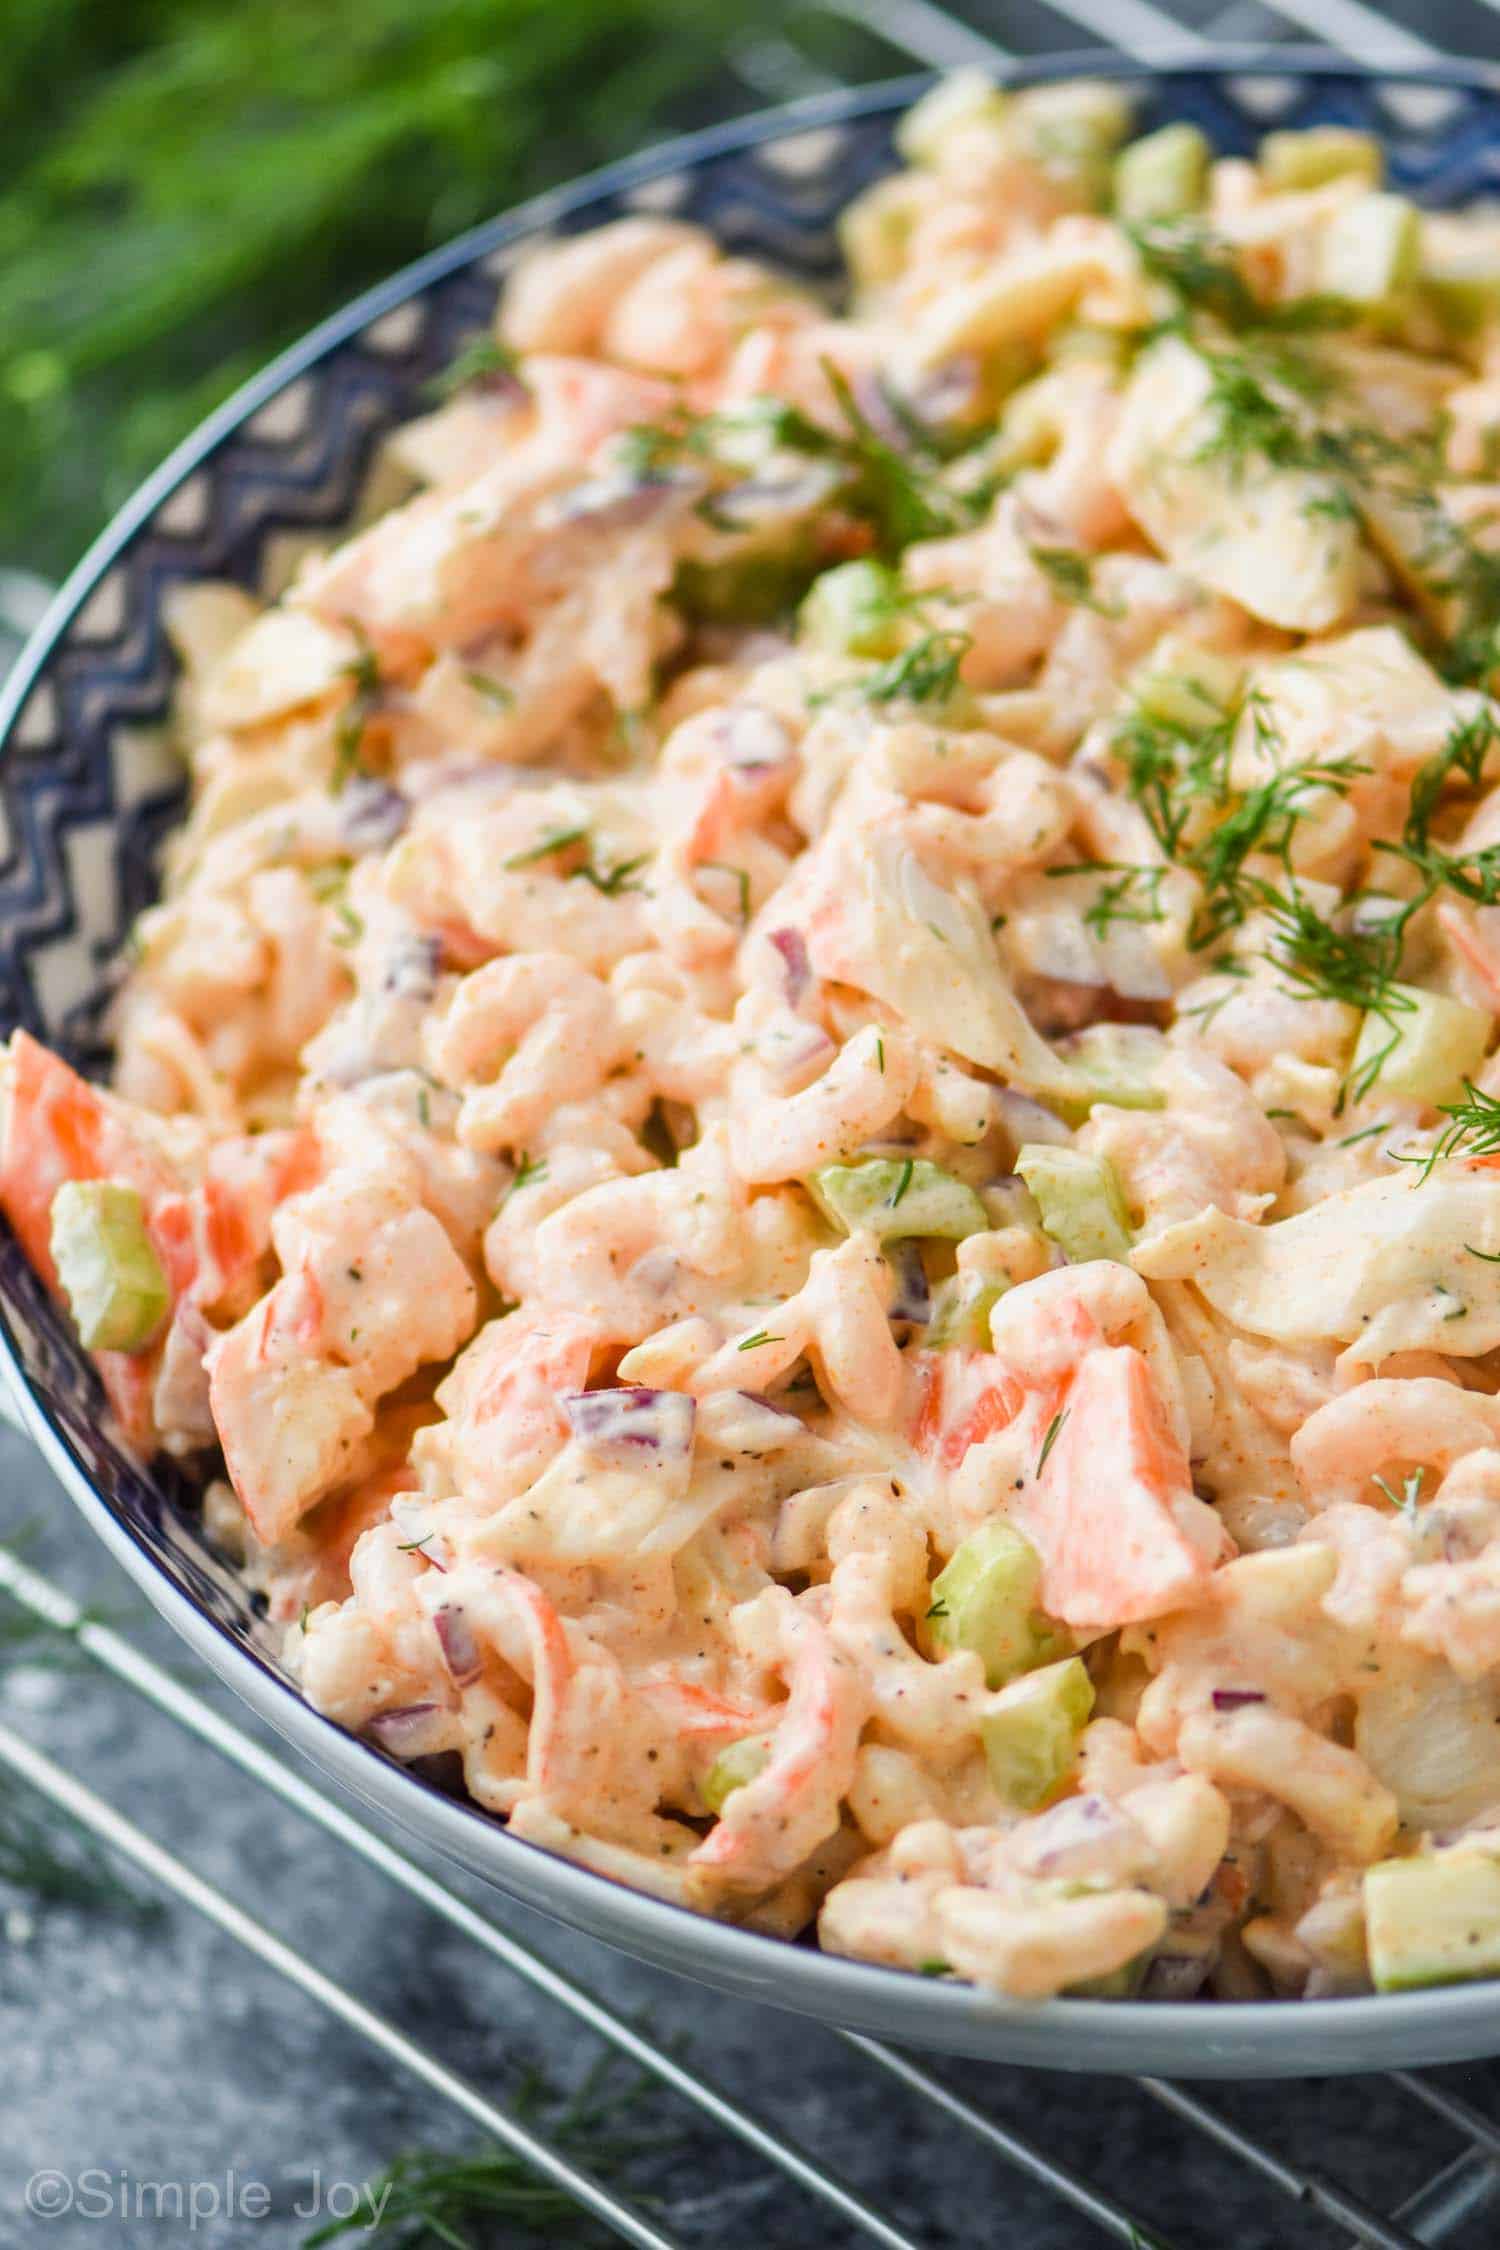 Seafood Salad with Crabmeat and Shrimp: An Easy and Delicious Recipe